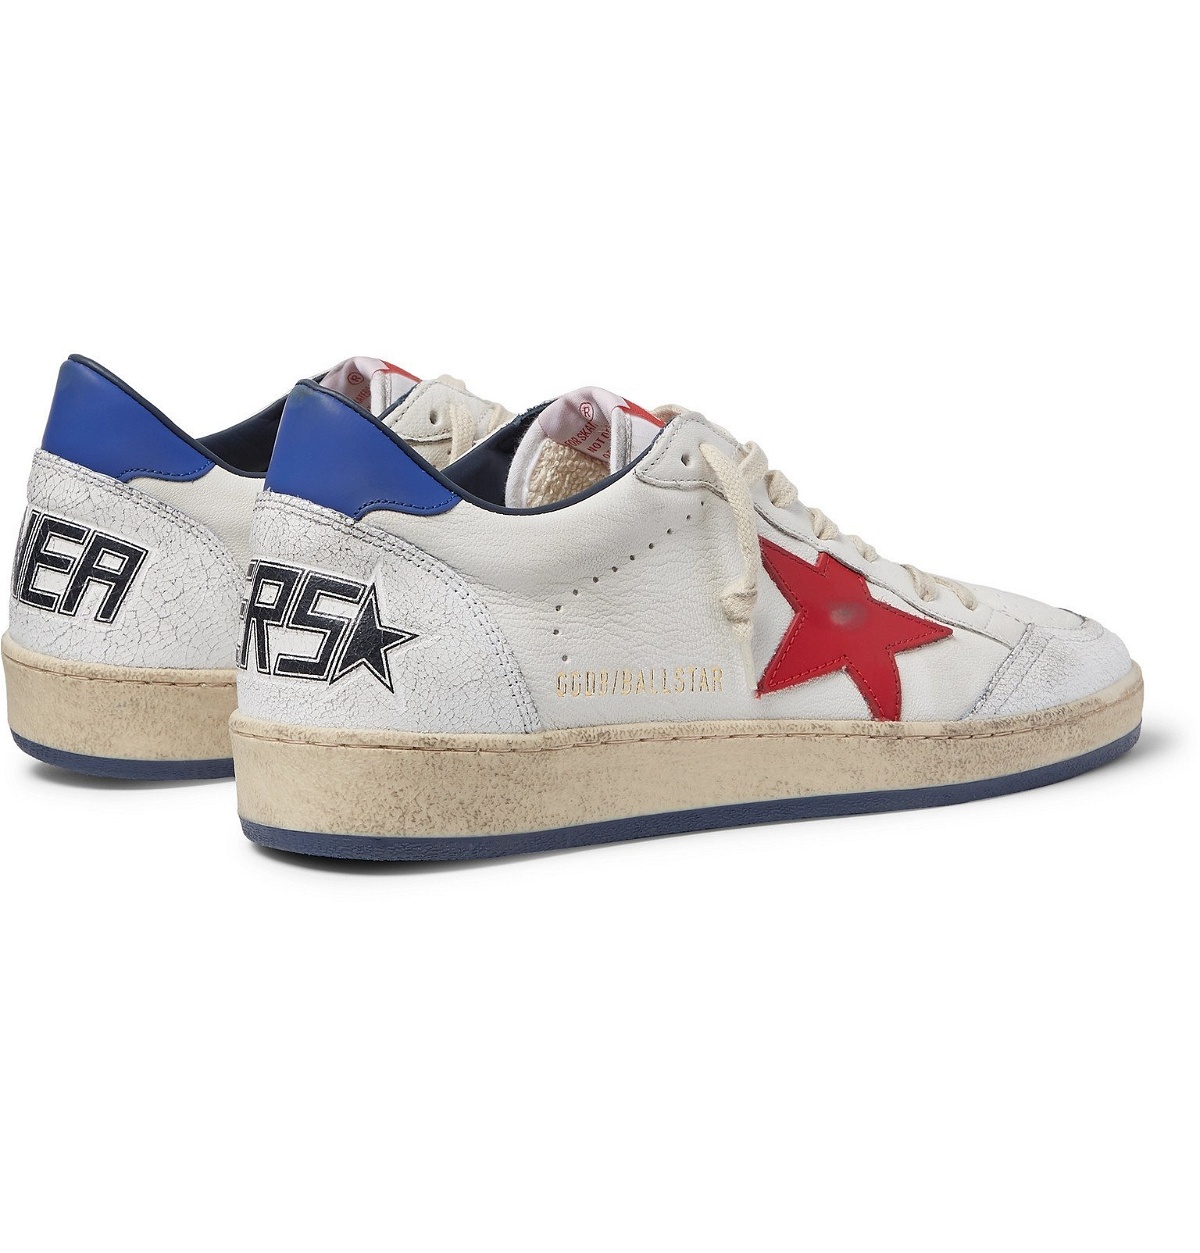 Golden Goose - Ball Star Distressed Leather Sneakers - White Golden Goose  Deluxe Brand